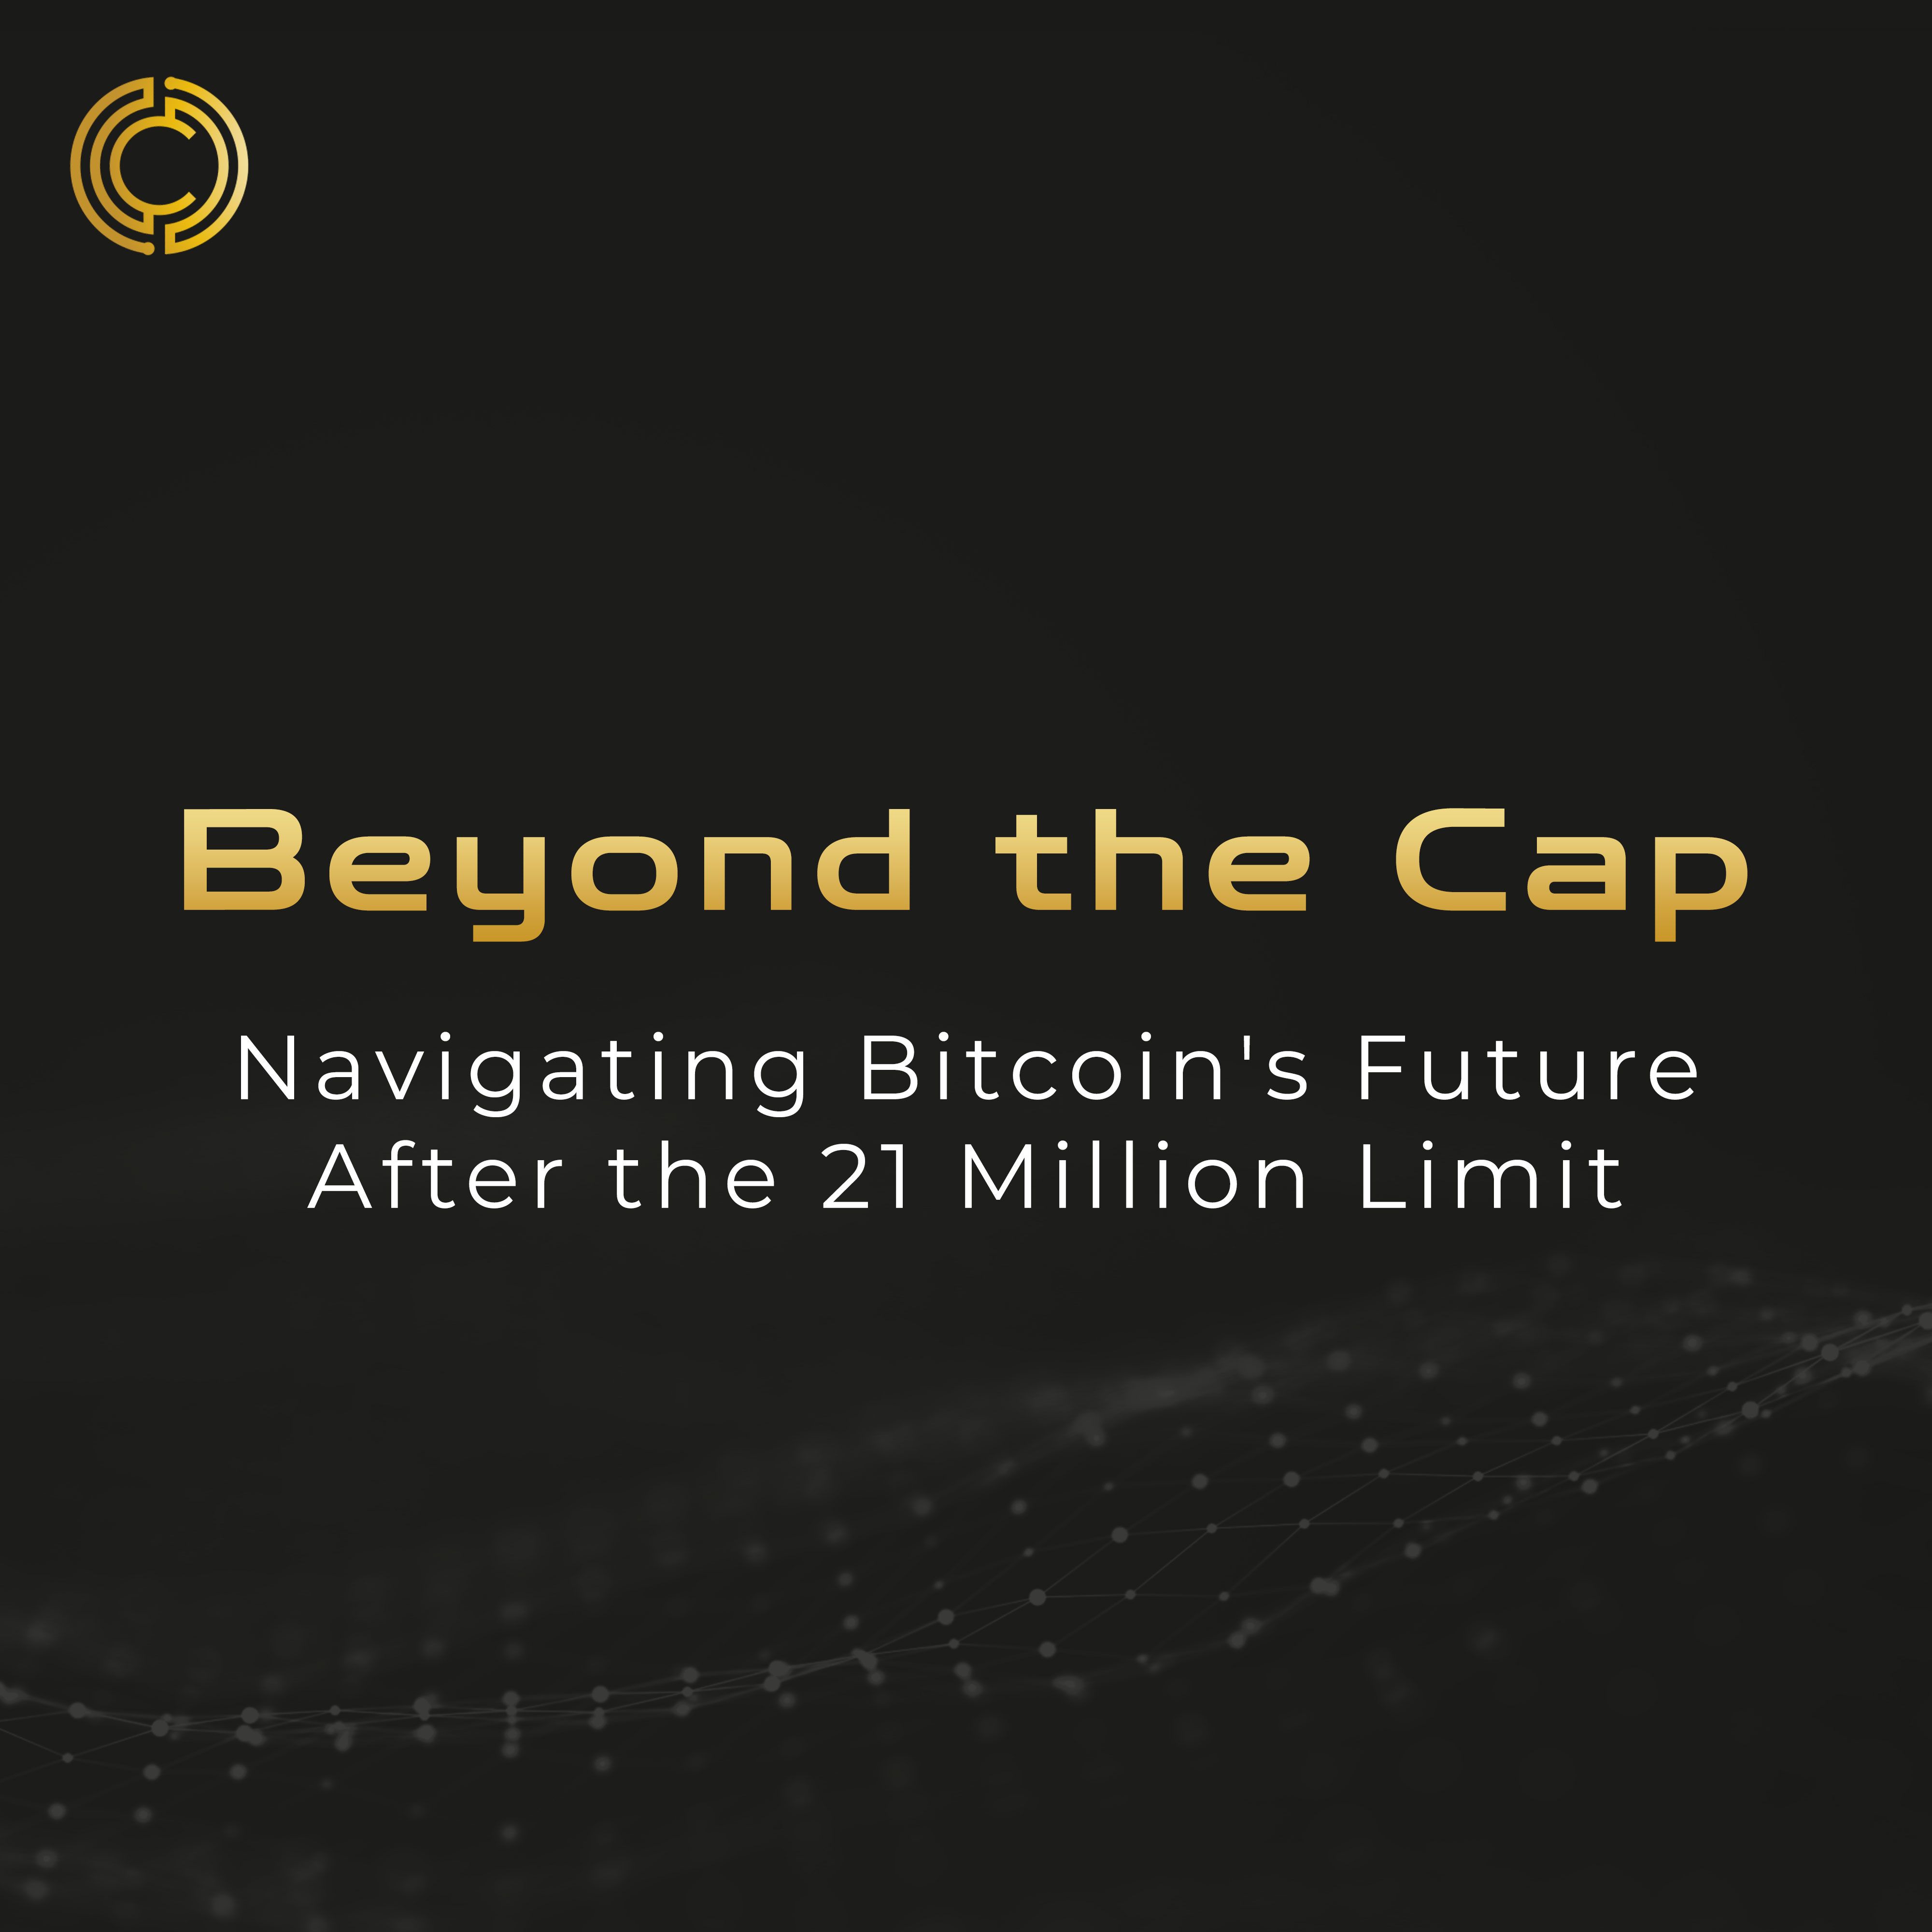 Beyond the Cap: Navigating Bitcoin’s Future After the 21 Million Limit